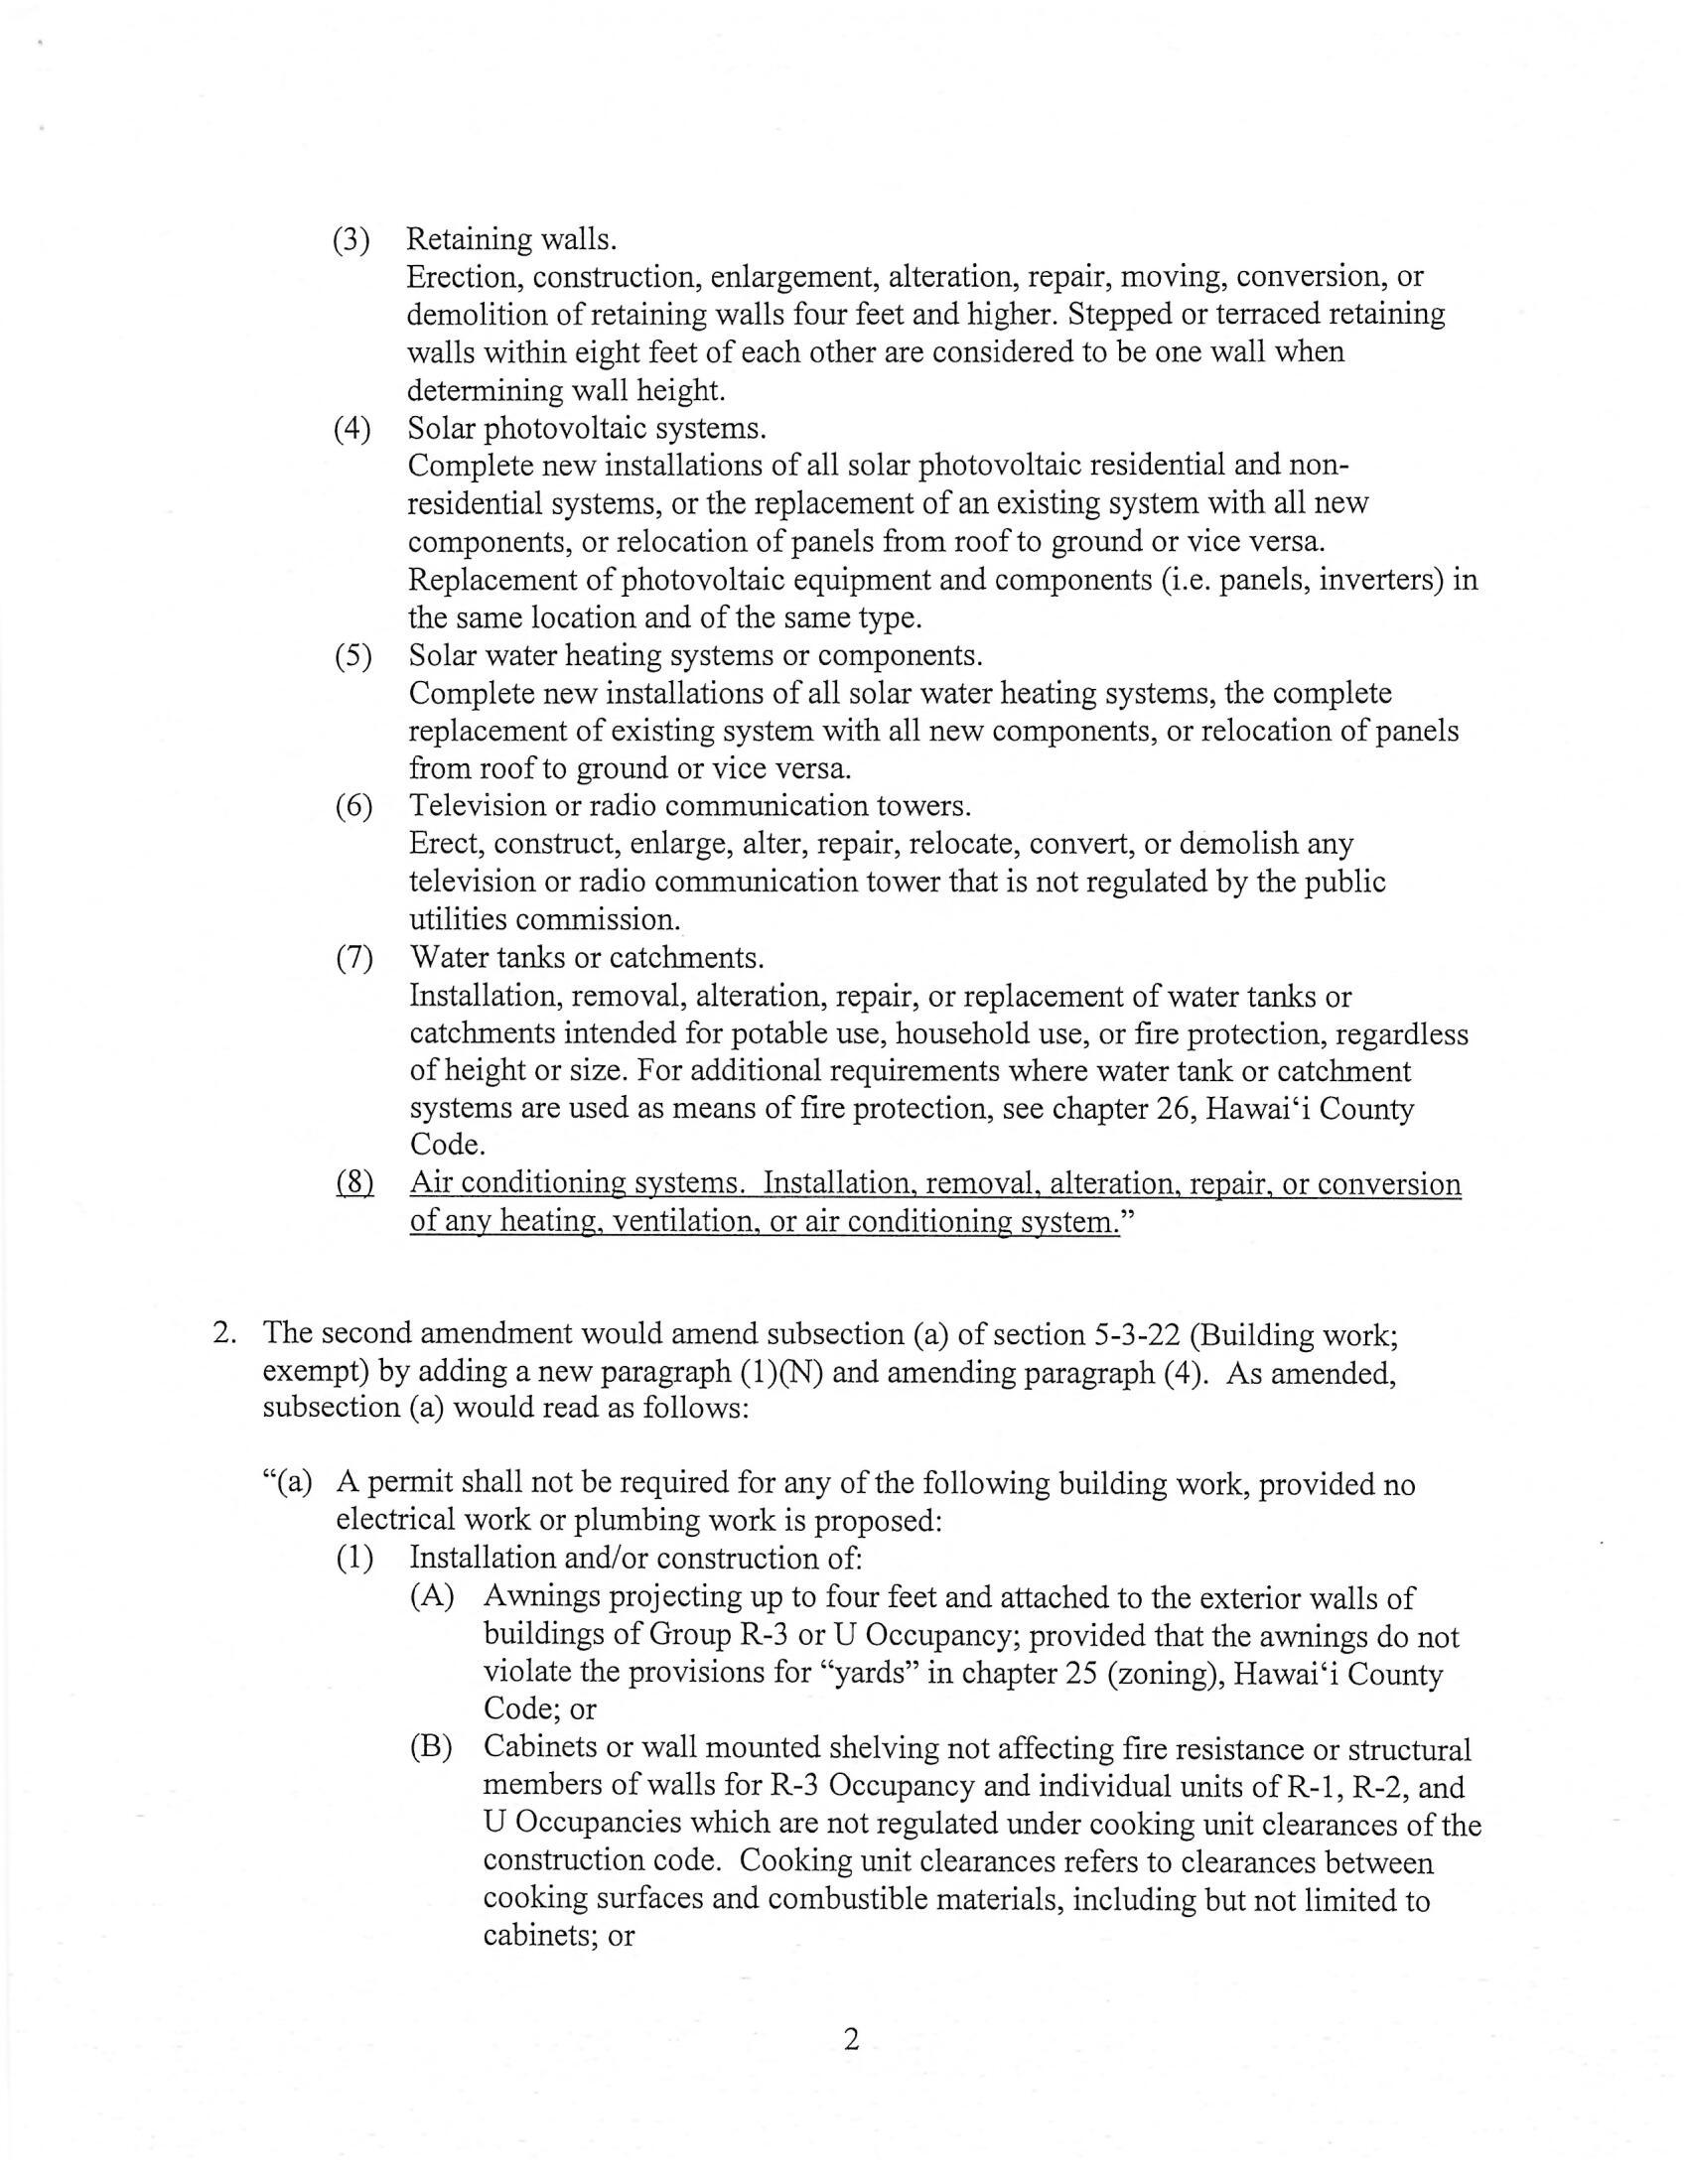 Proposed amendments to Bill 179 page 2